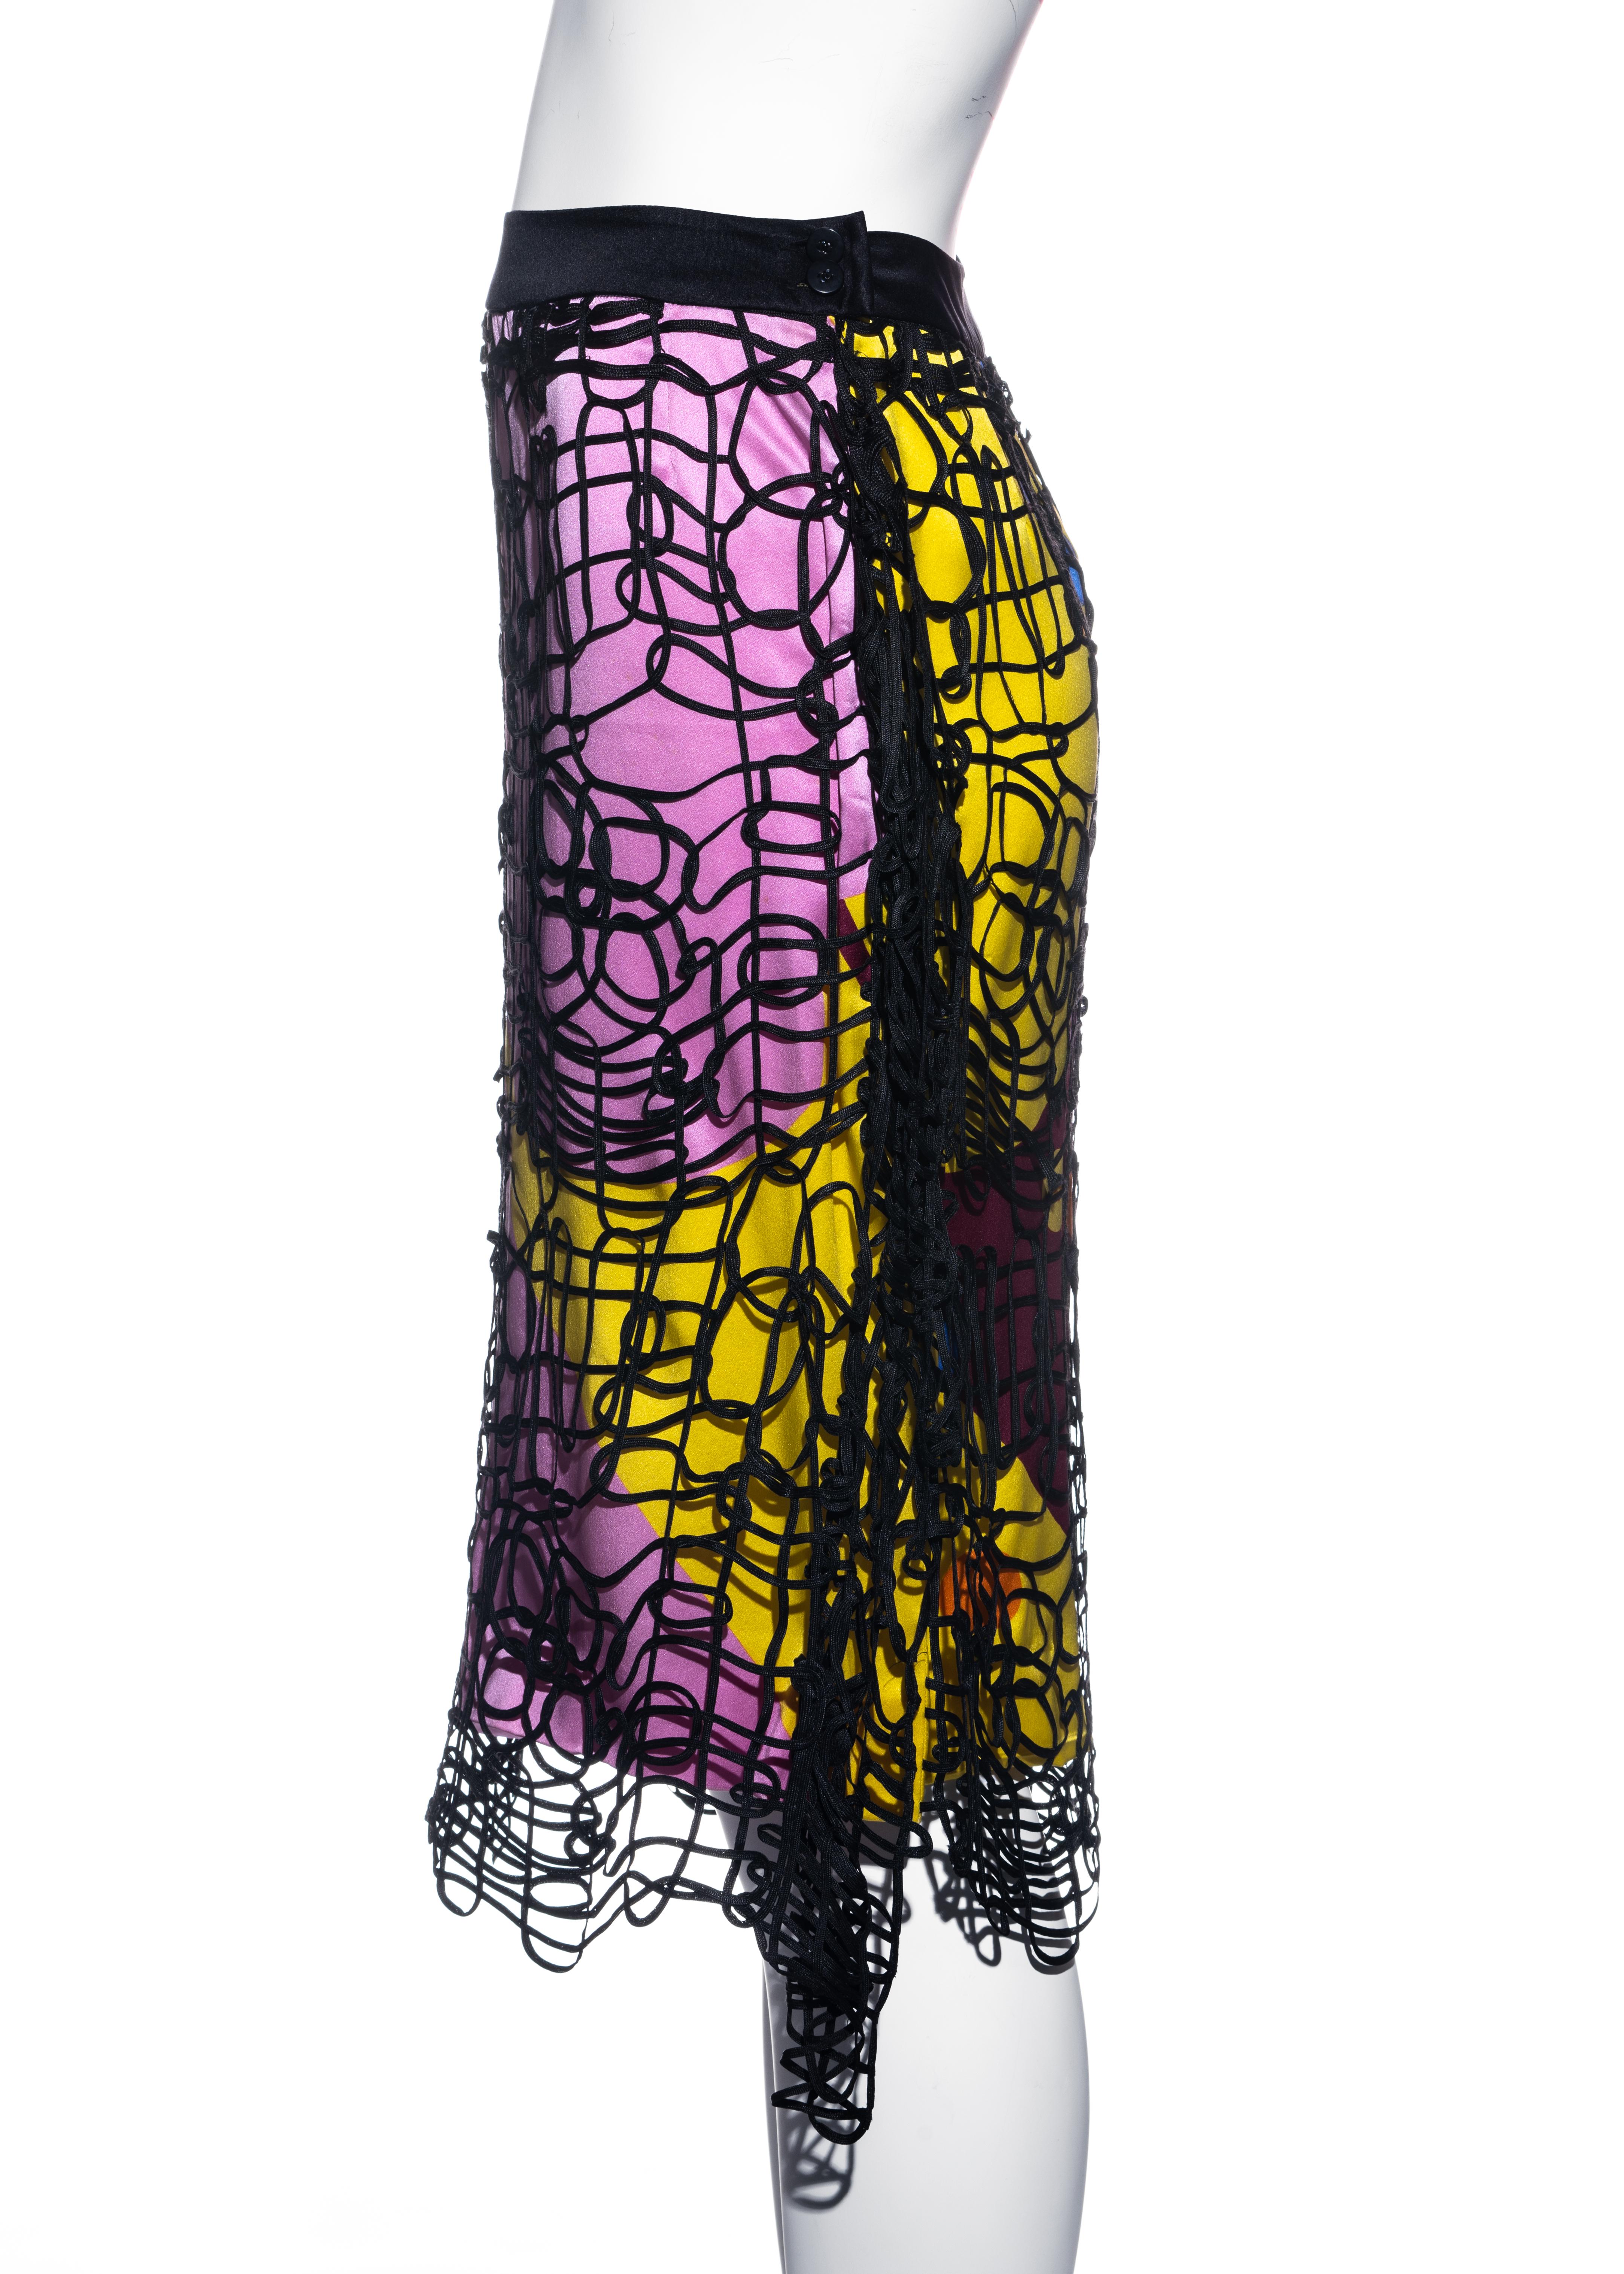 Chanel by Karl Lagerfeld multicoloured silk skirt with ribbon overlay, ss 2000 1